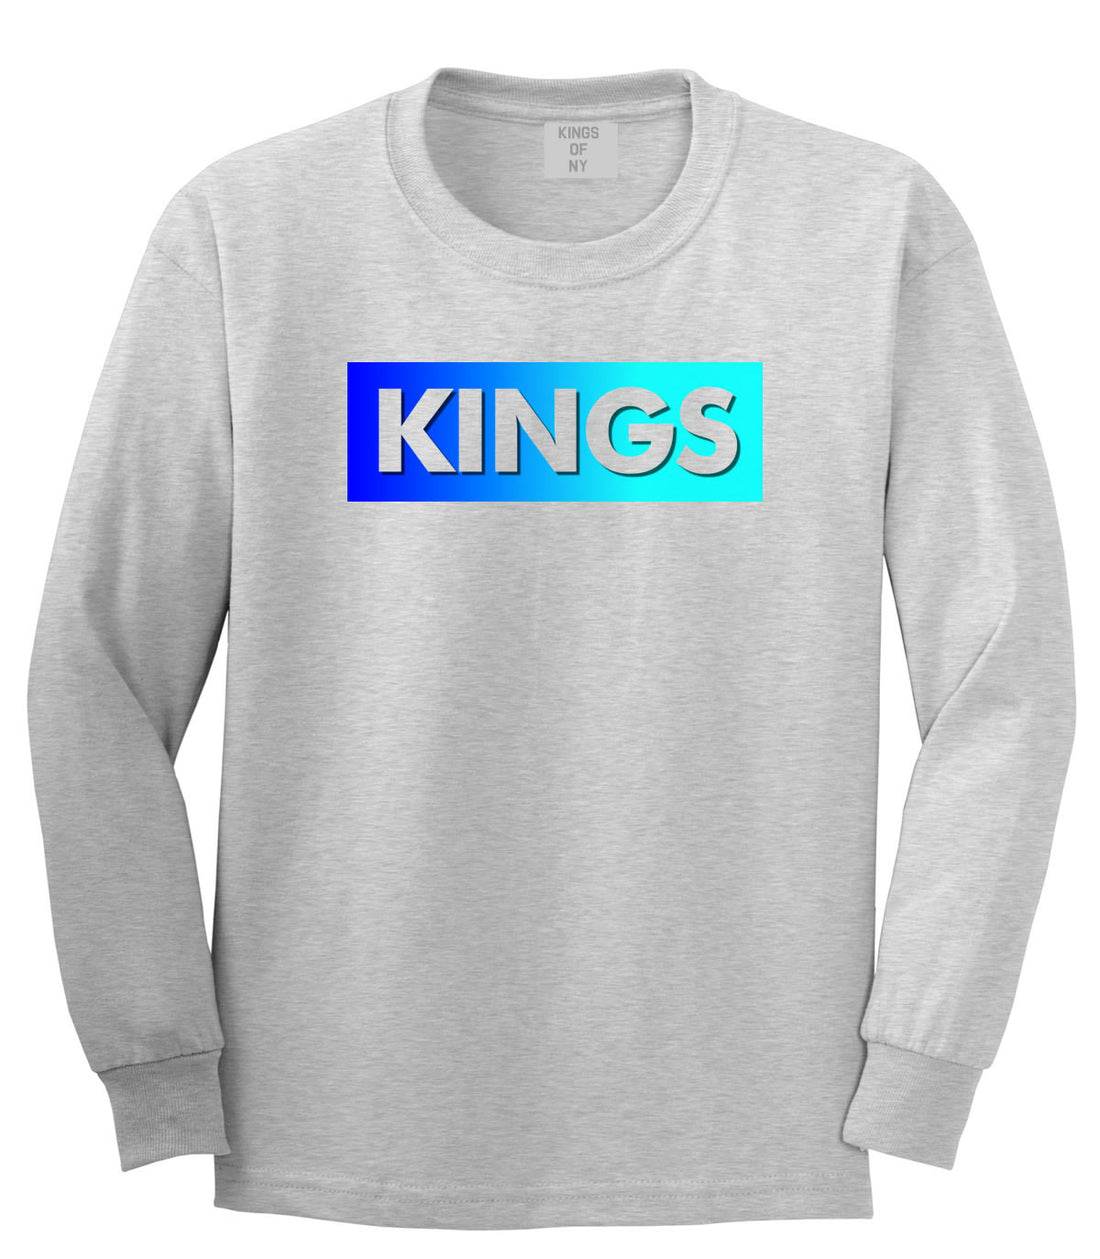 Kings Blue Gradient Long Sleeve T-Shirt in Grey by Kings Of NY